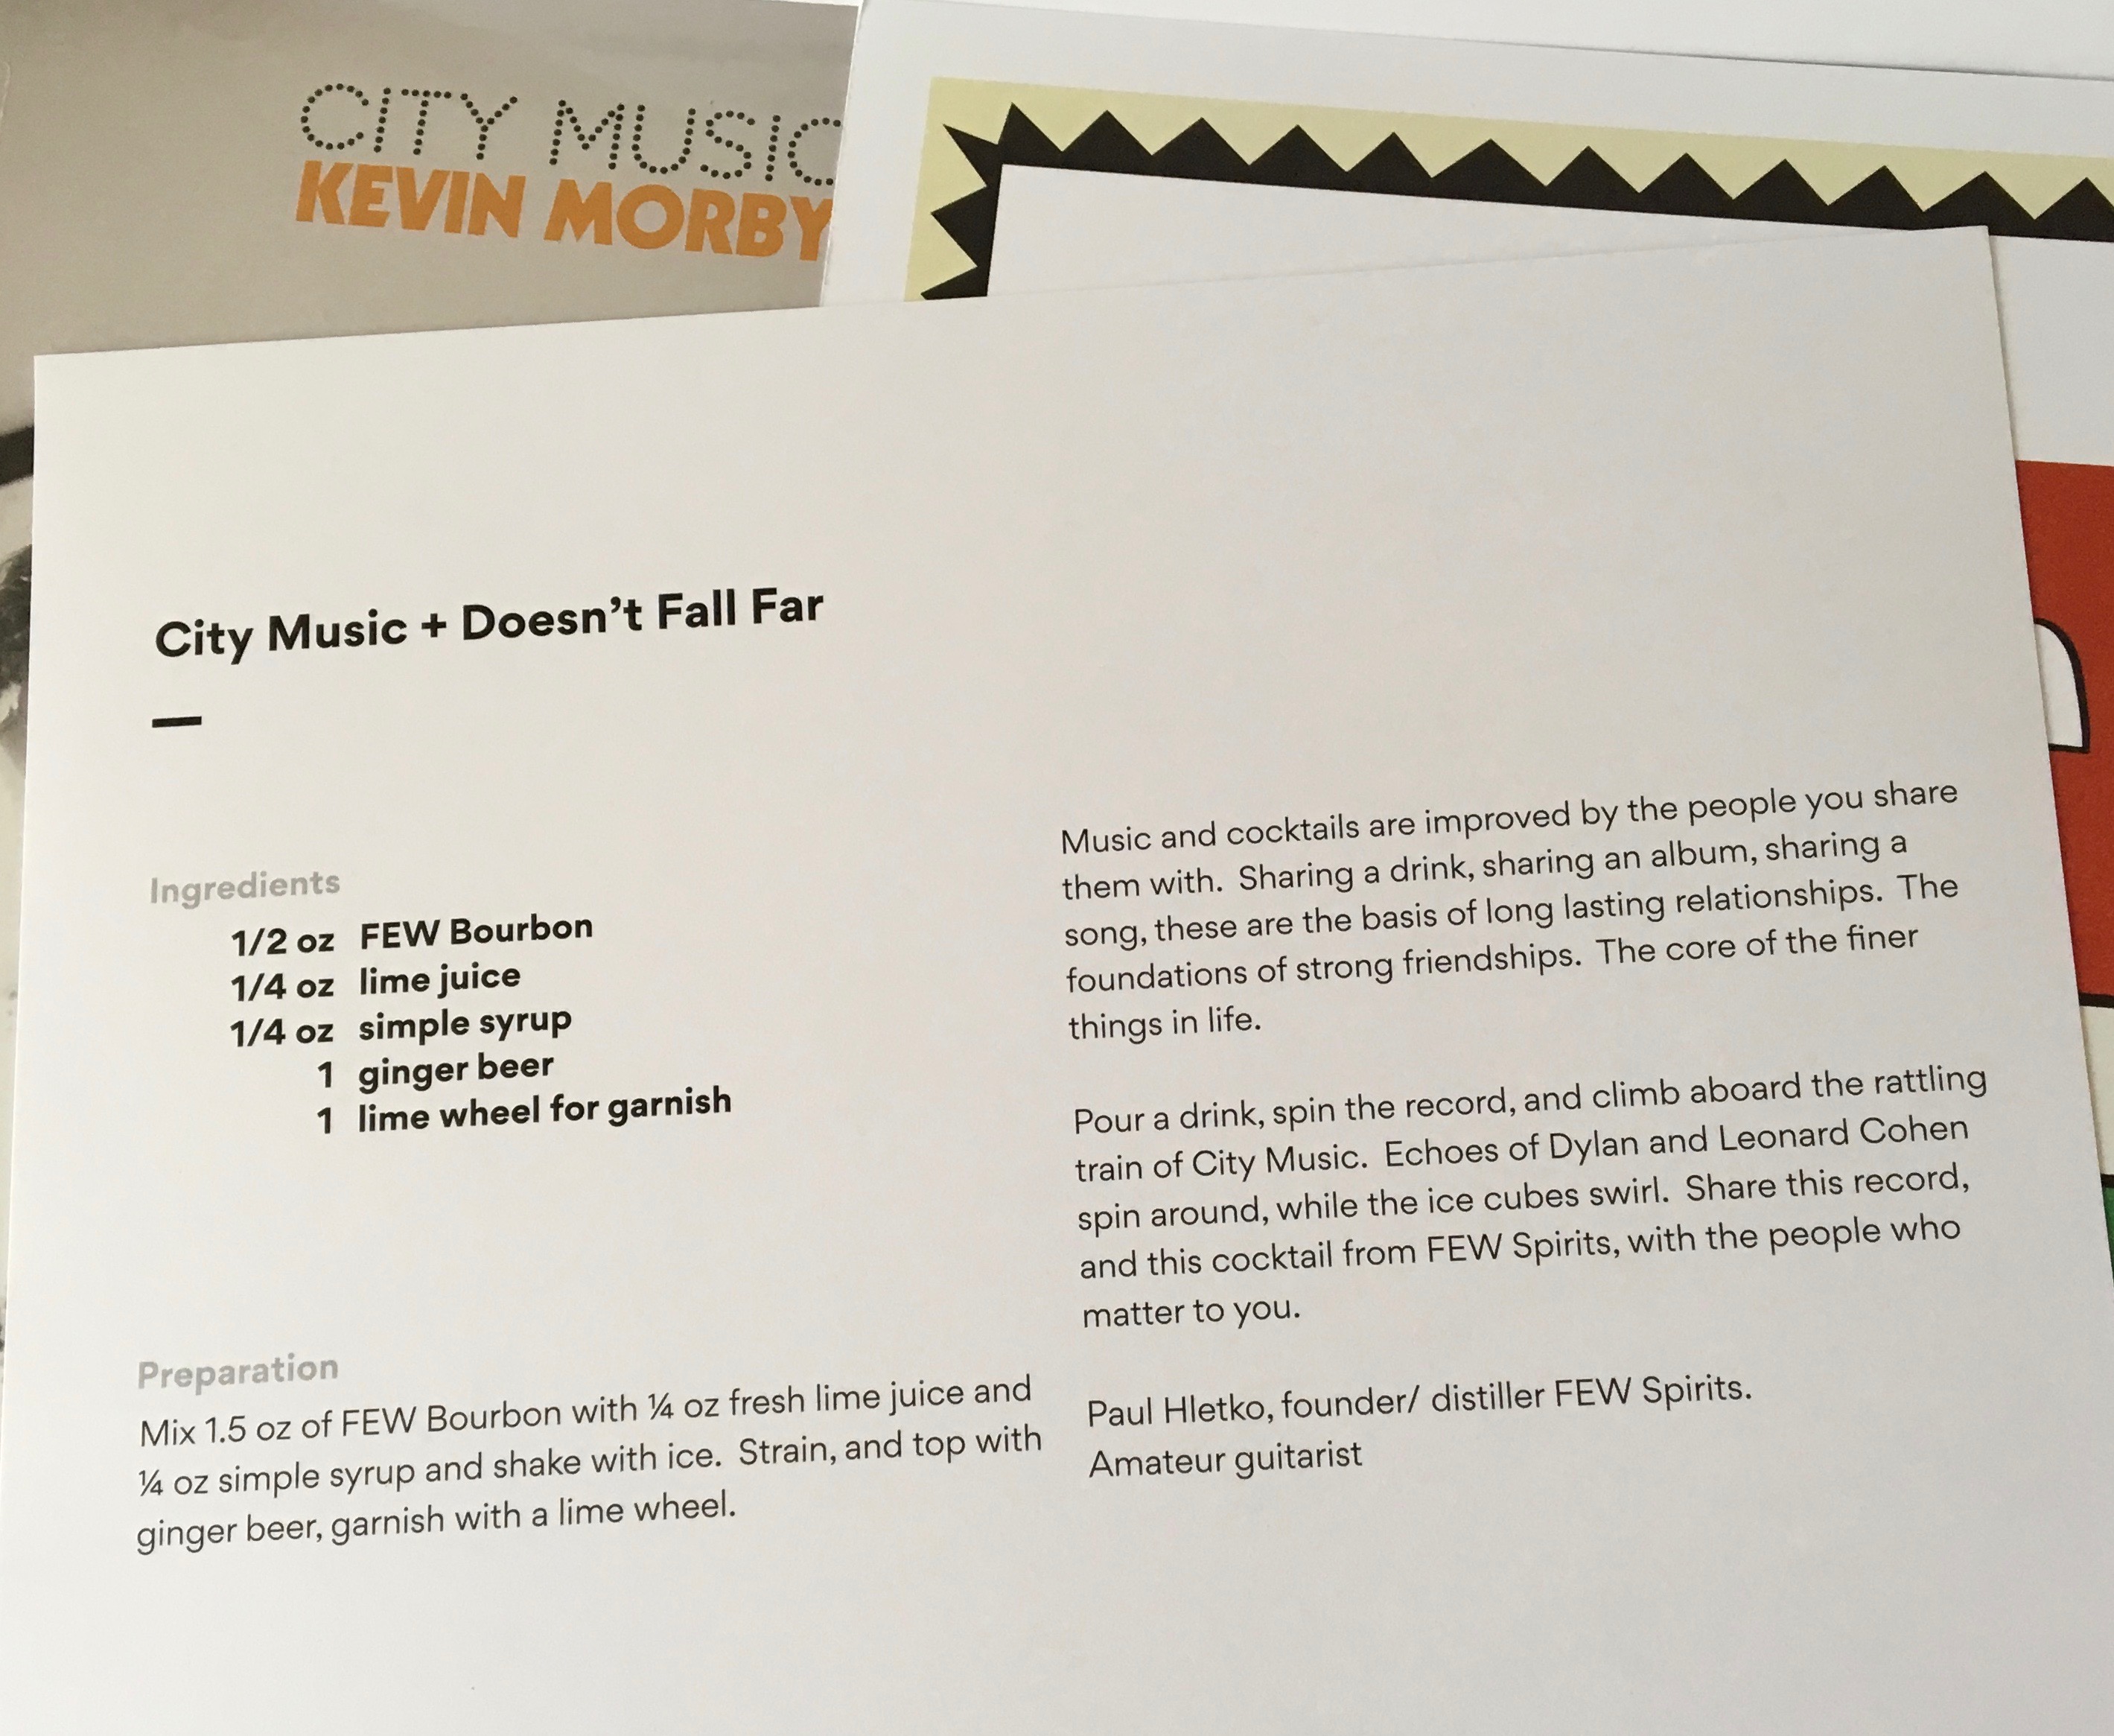 Geek insider, geekinsider, geekinsider. Com,, vinyl me, please june edition: kevin morby 'city music', entertainment